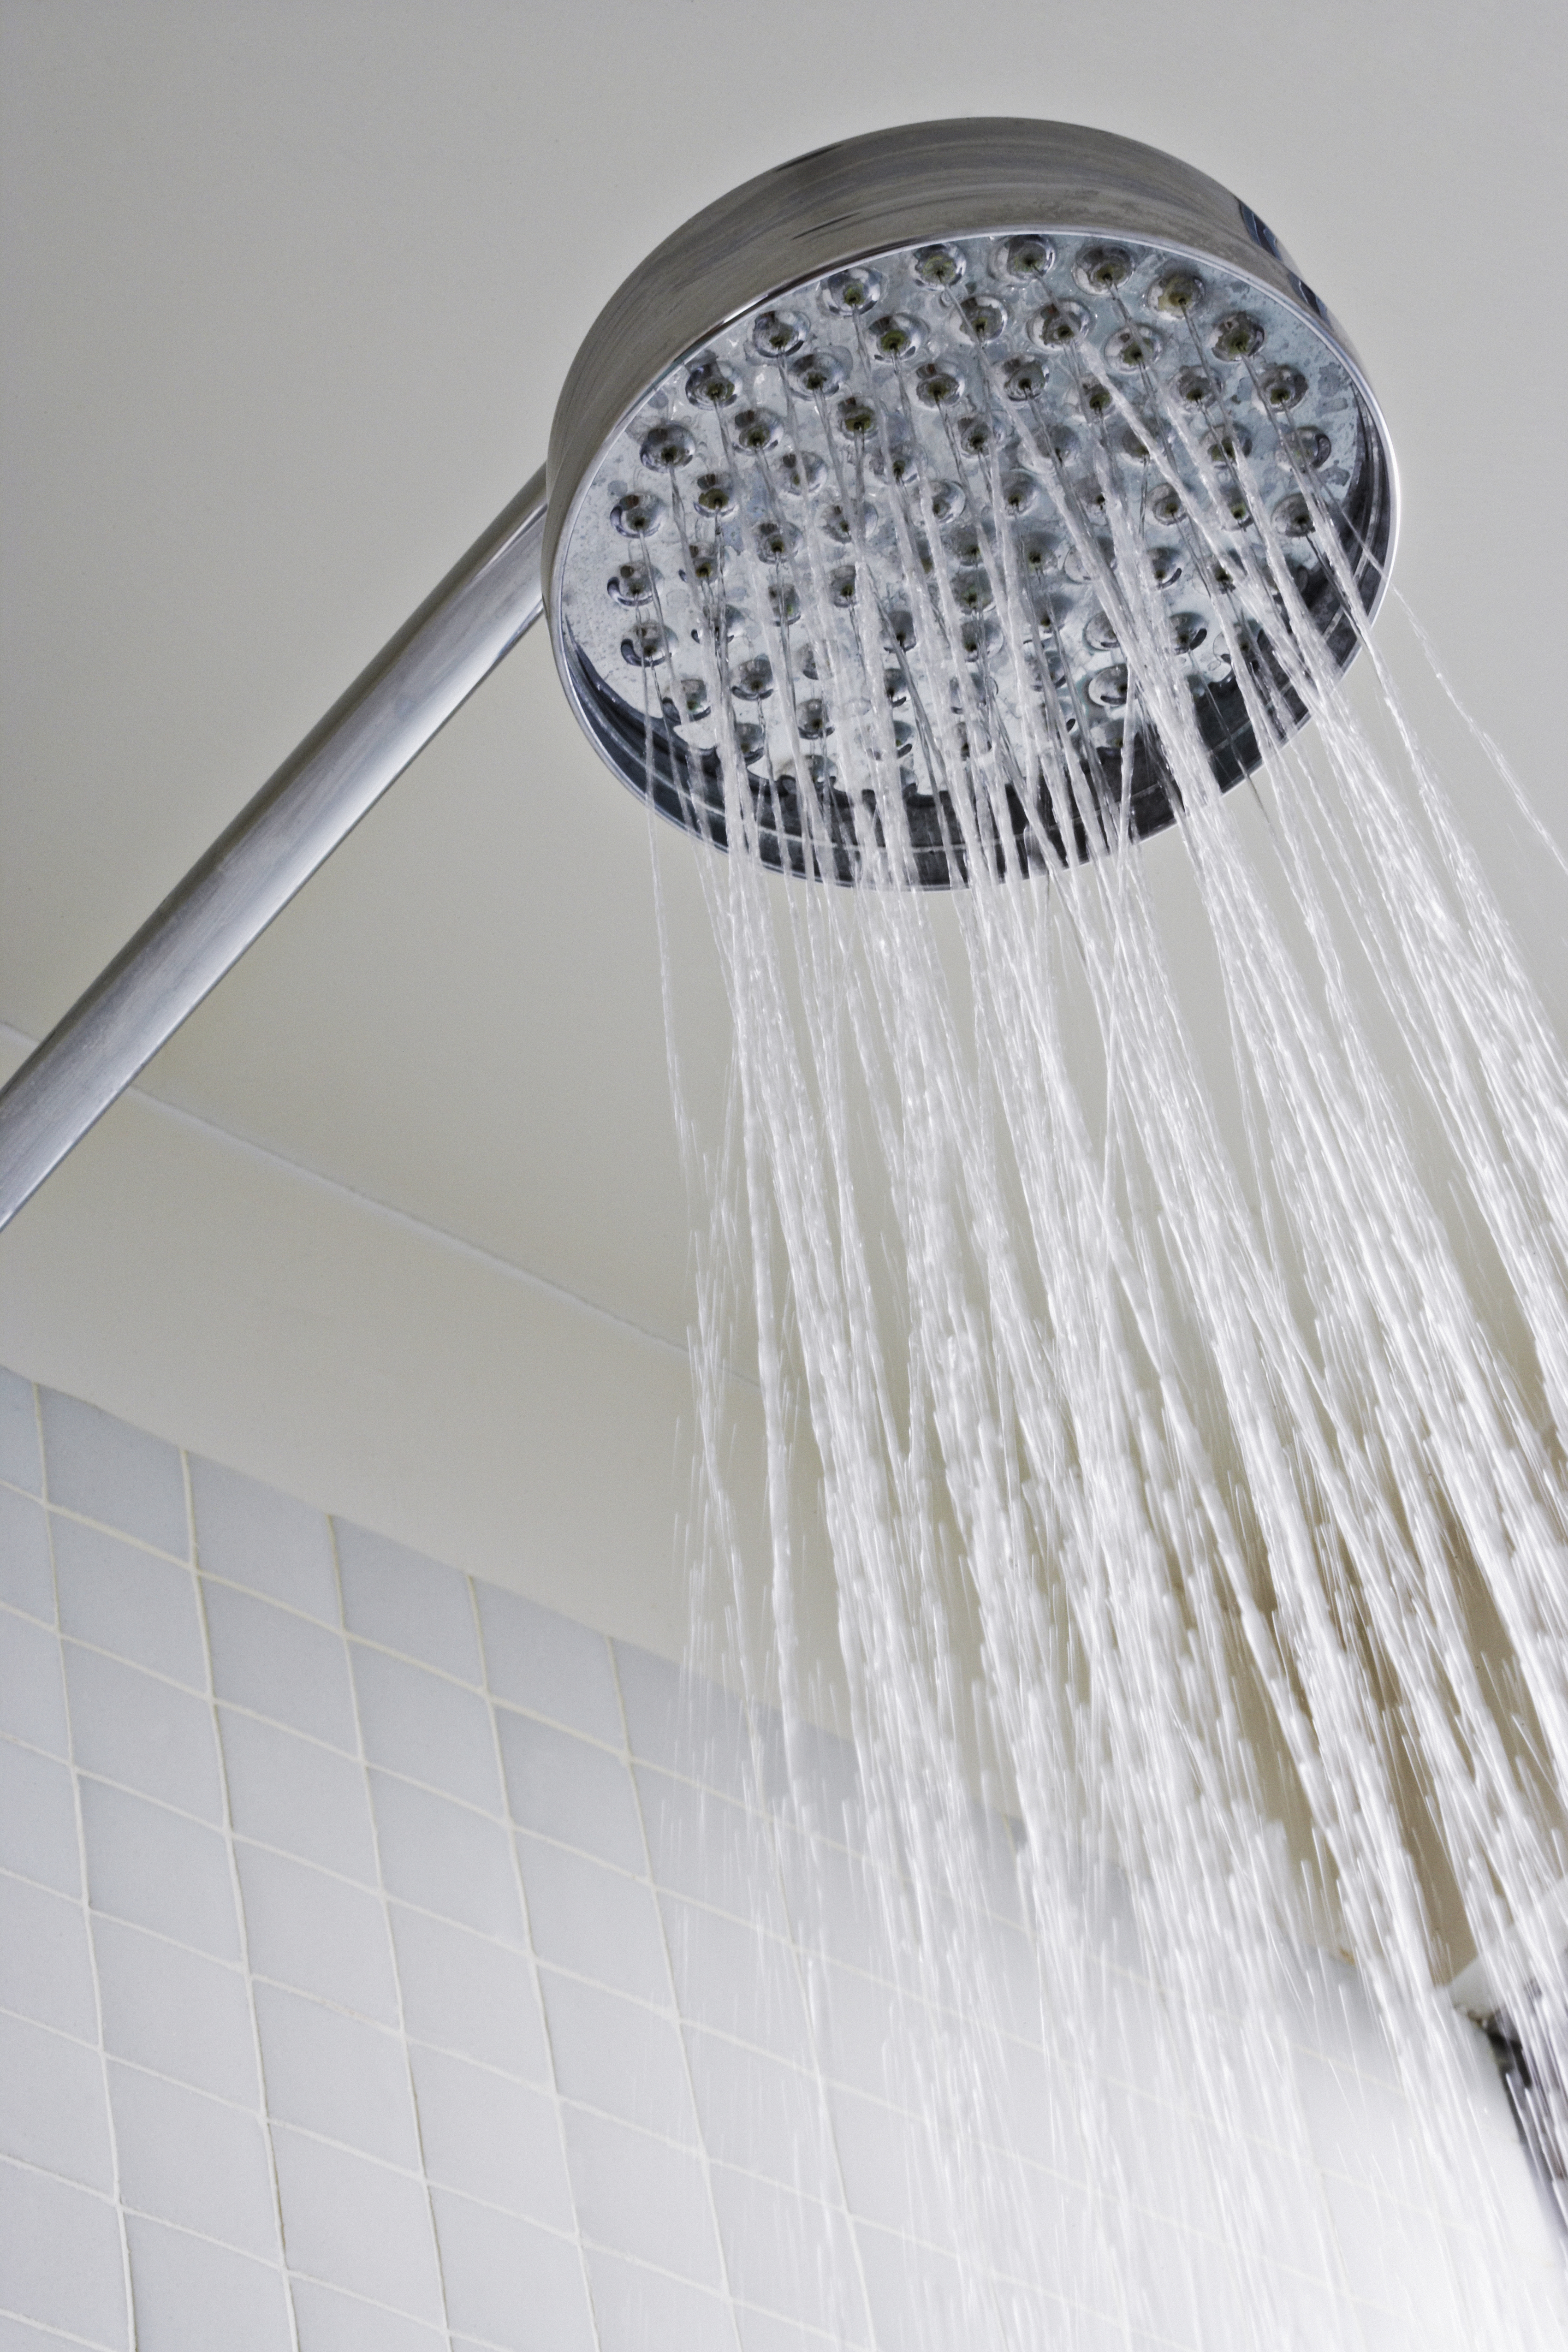 A showerhead with water running